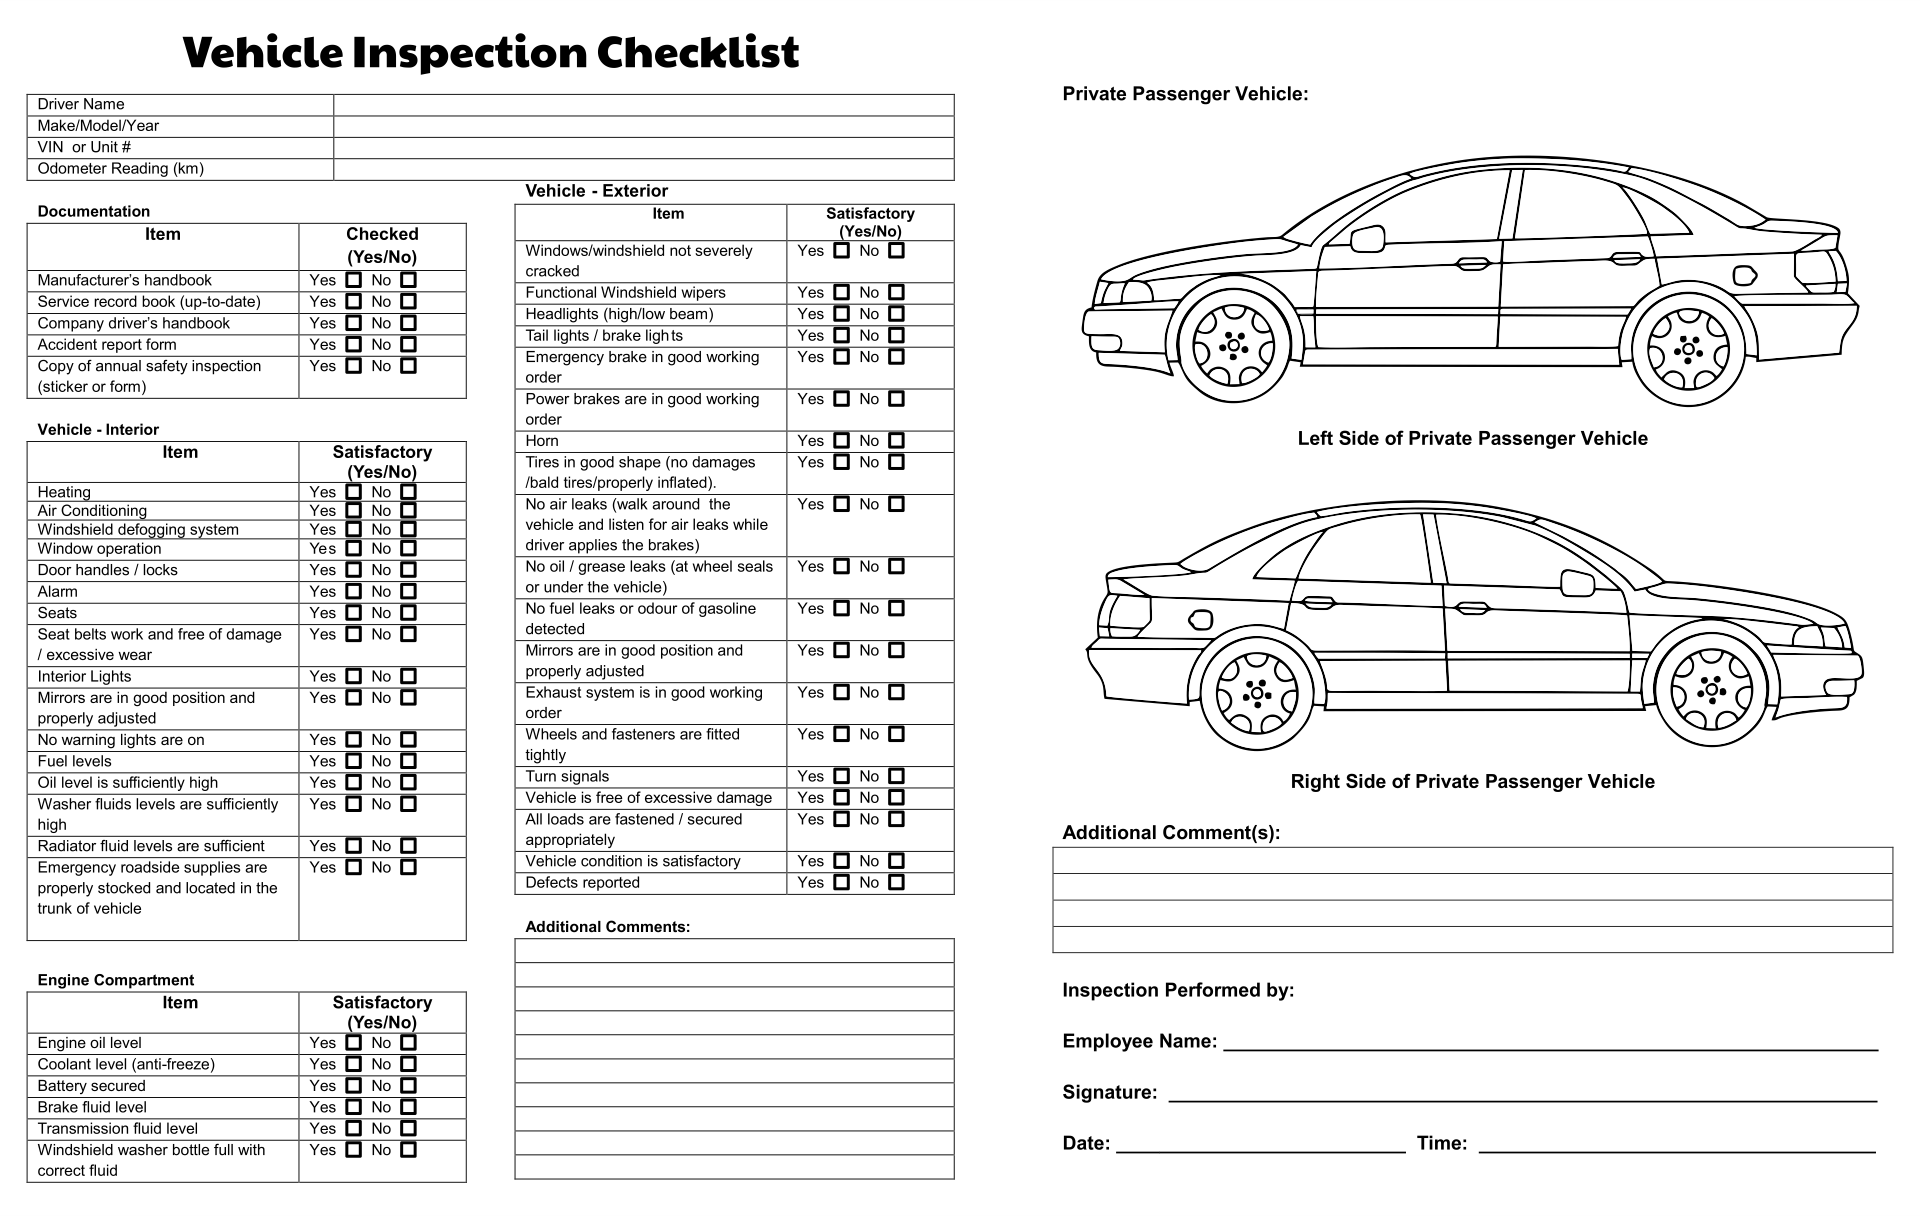 Benefits of Digital Vehicle Inspections for Automotive Companies and